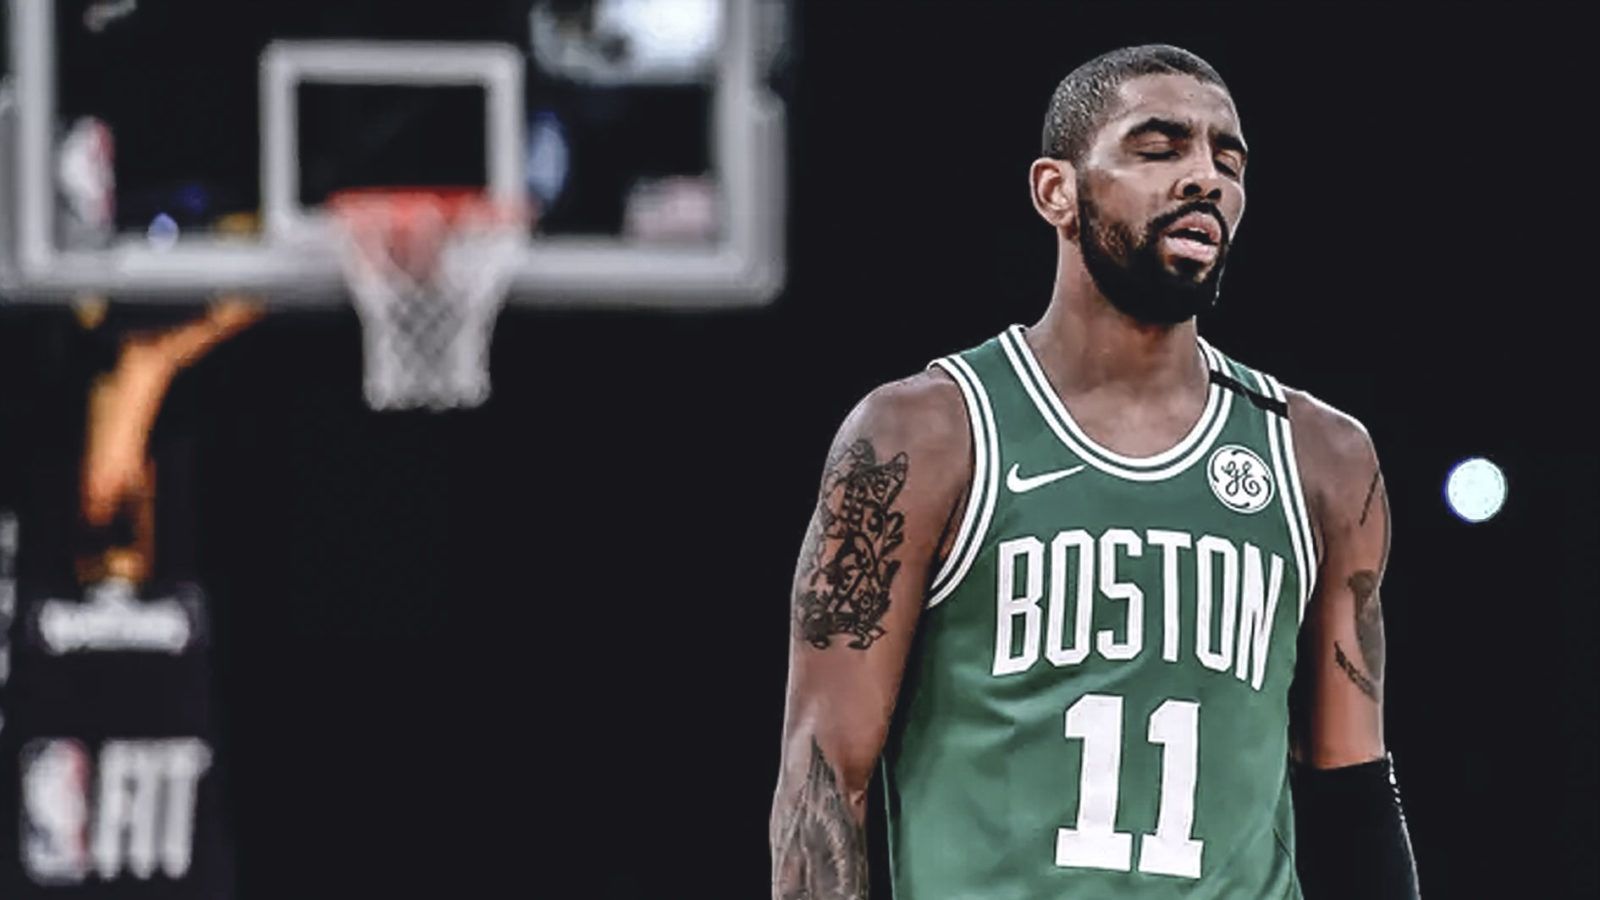 Brad Stevens on how Kyrie Irving is handling being out for Cavs series